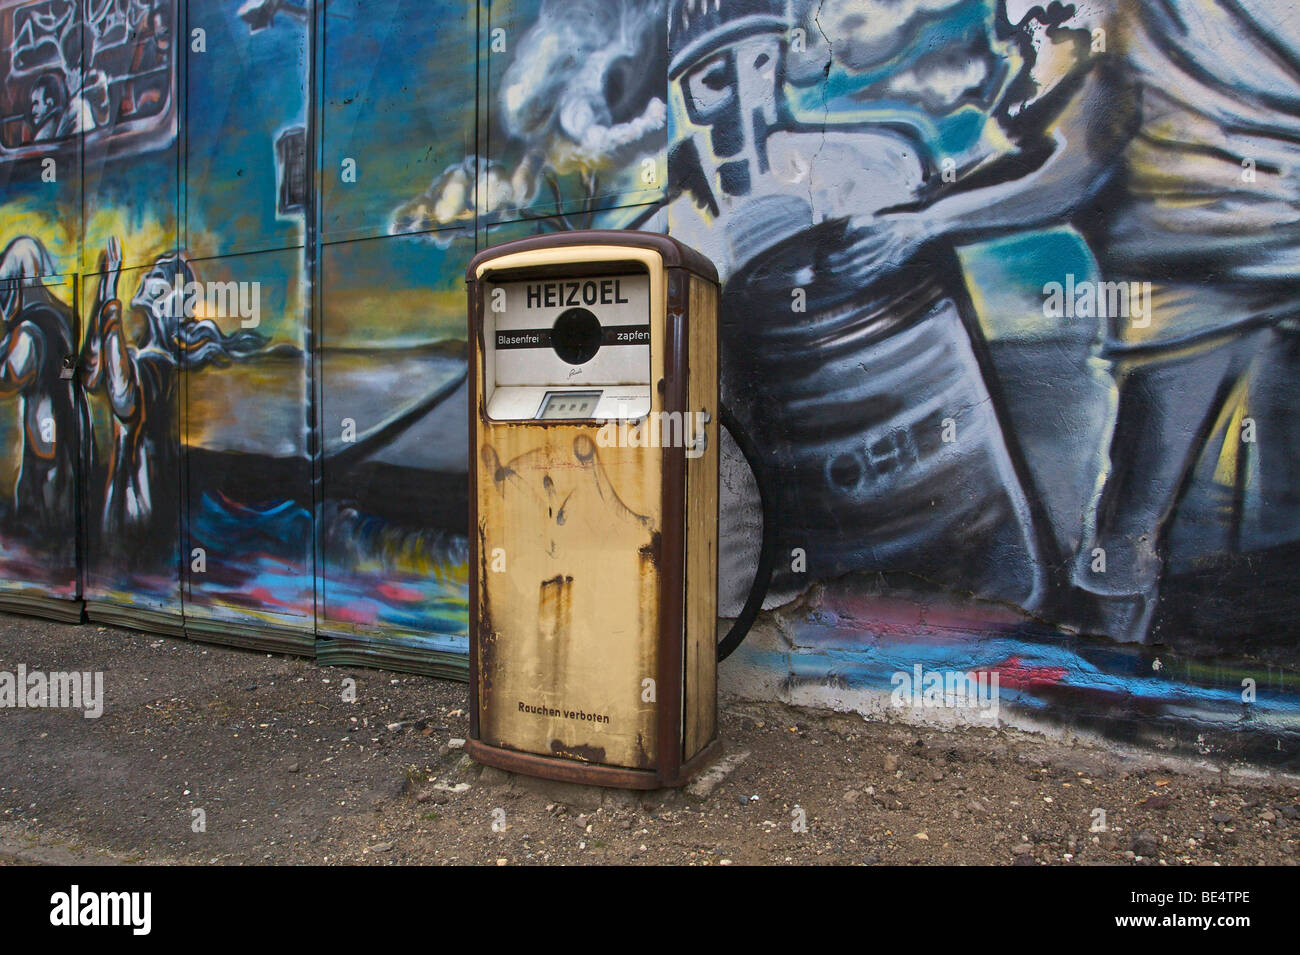 Old petrol pump for heating oil on derelict factory premises in front of wall sprayed with graffiti Stock Photo